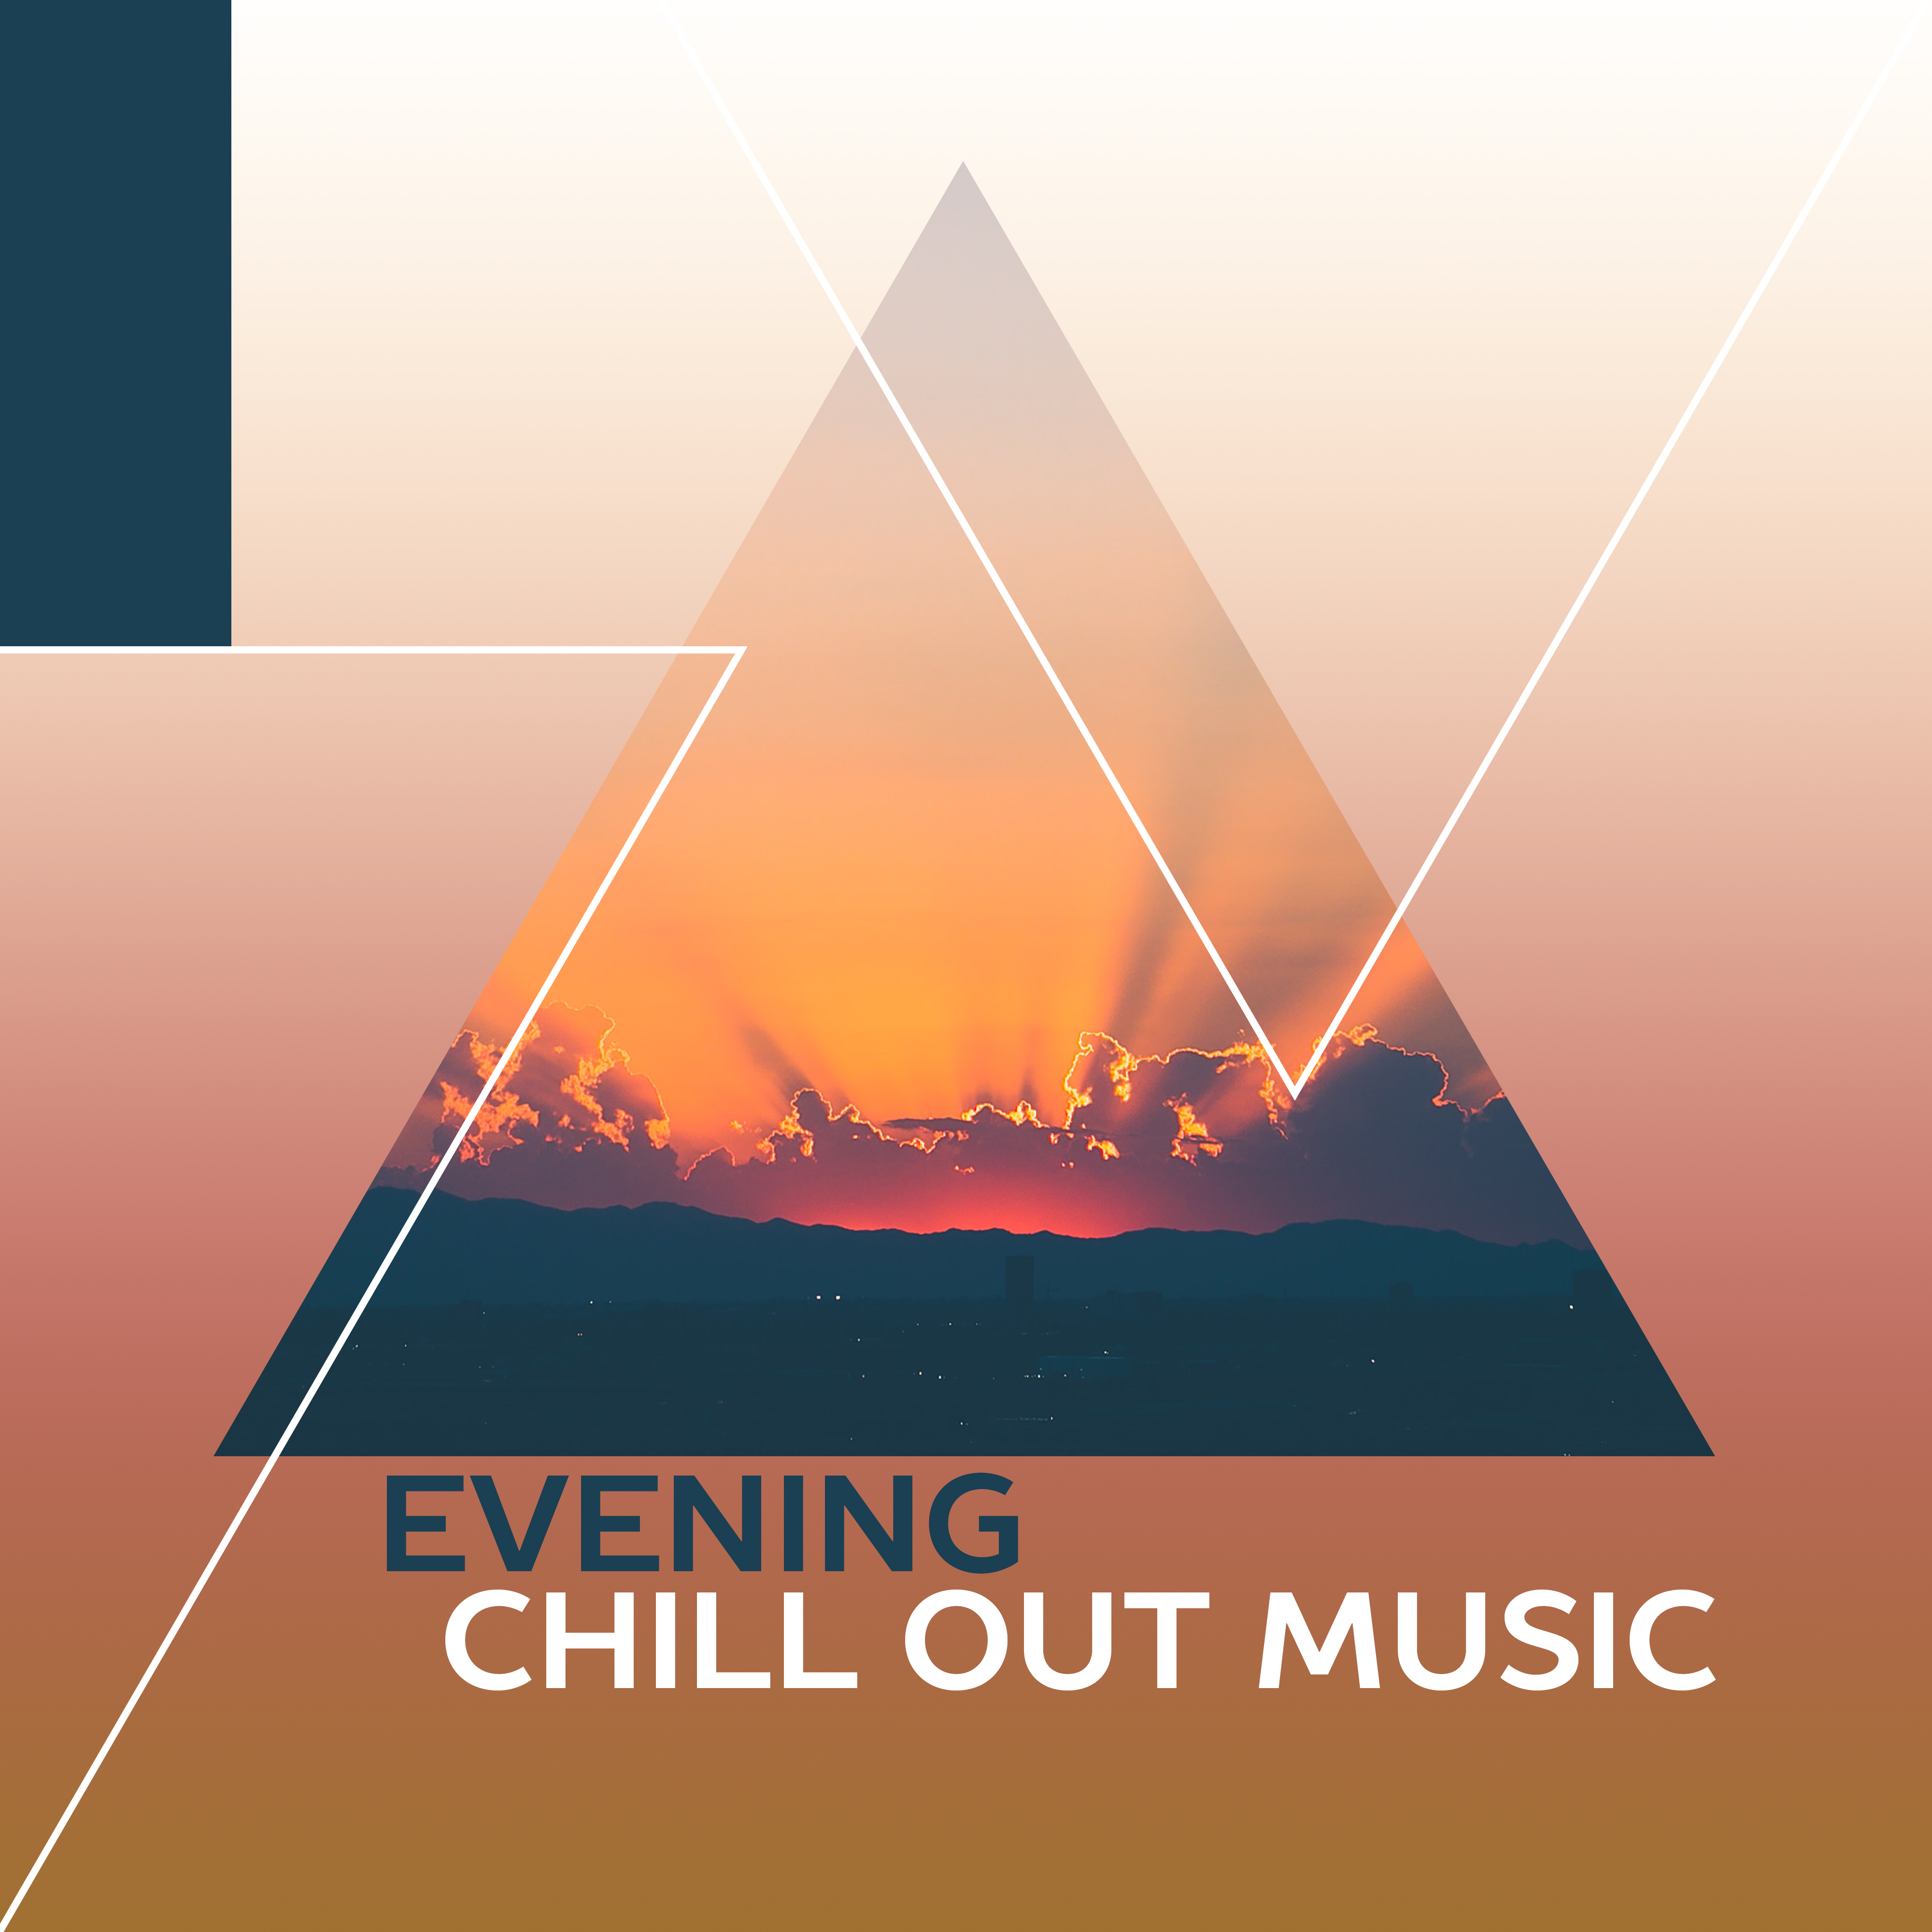 Evening Chill Out Music  Sounds to Have Fun, Night Rhytms, Summer Vibes, Beach Drinks